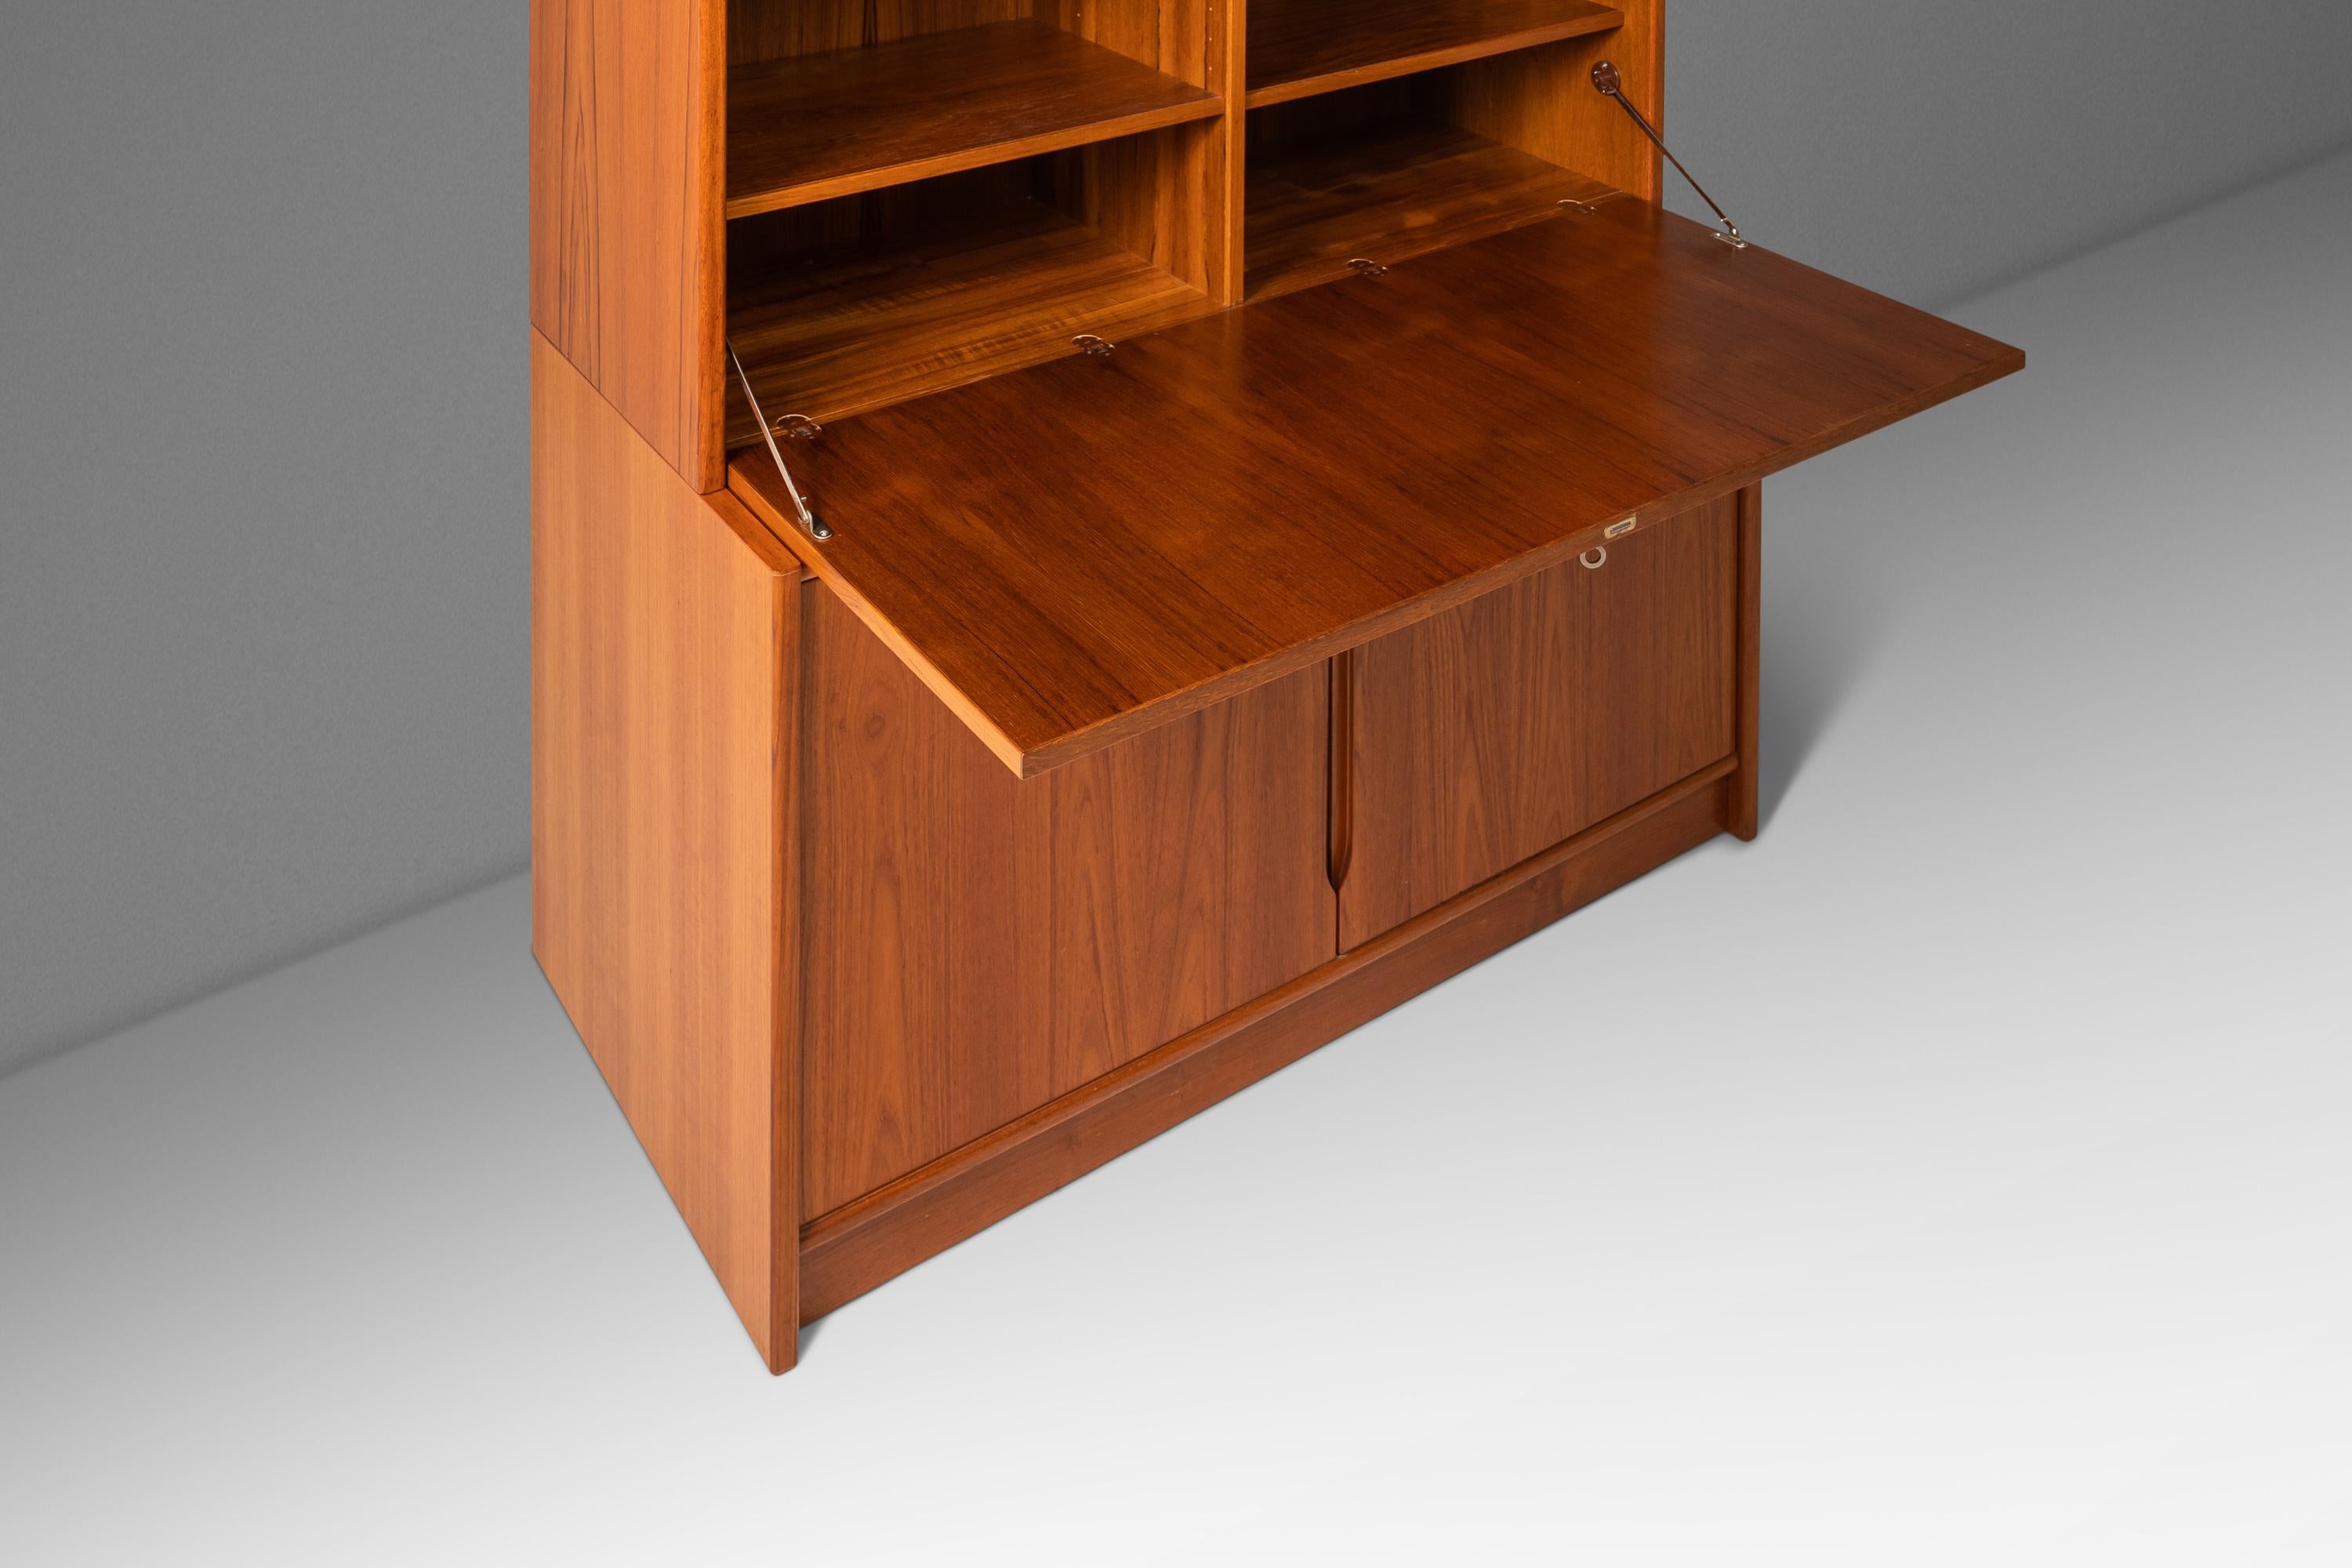 Late 20th Century China Cabinet in Teak with Secretary Drop Down Desk Top After Poul Hundevad, 70s